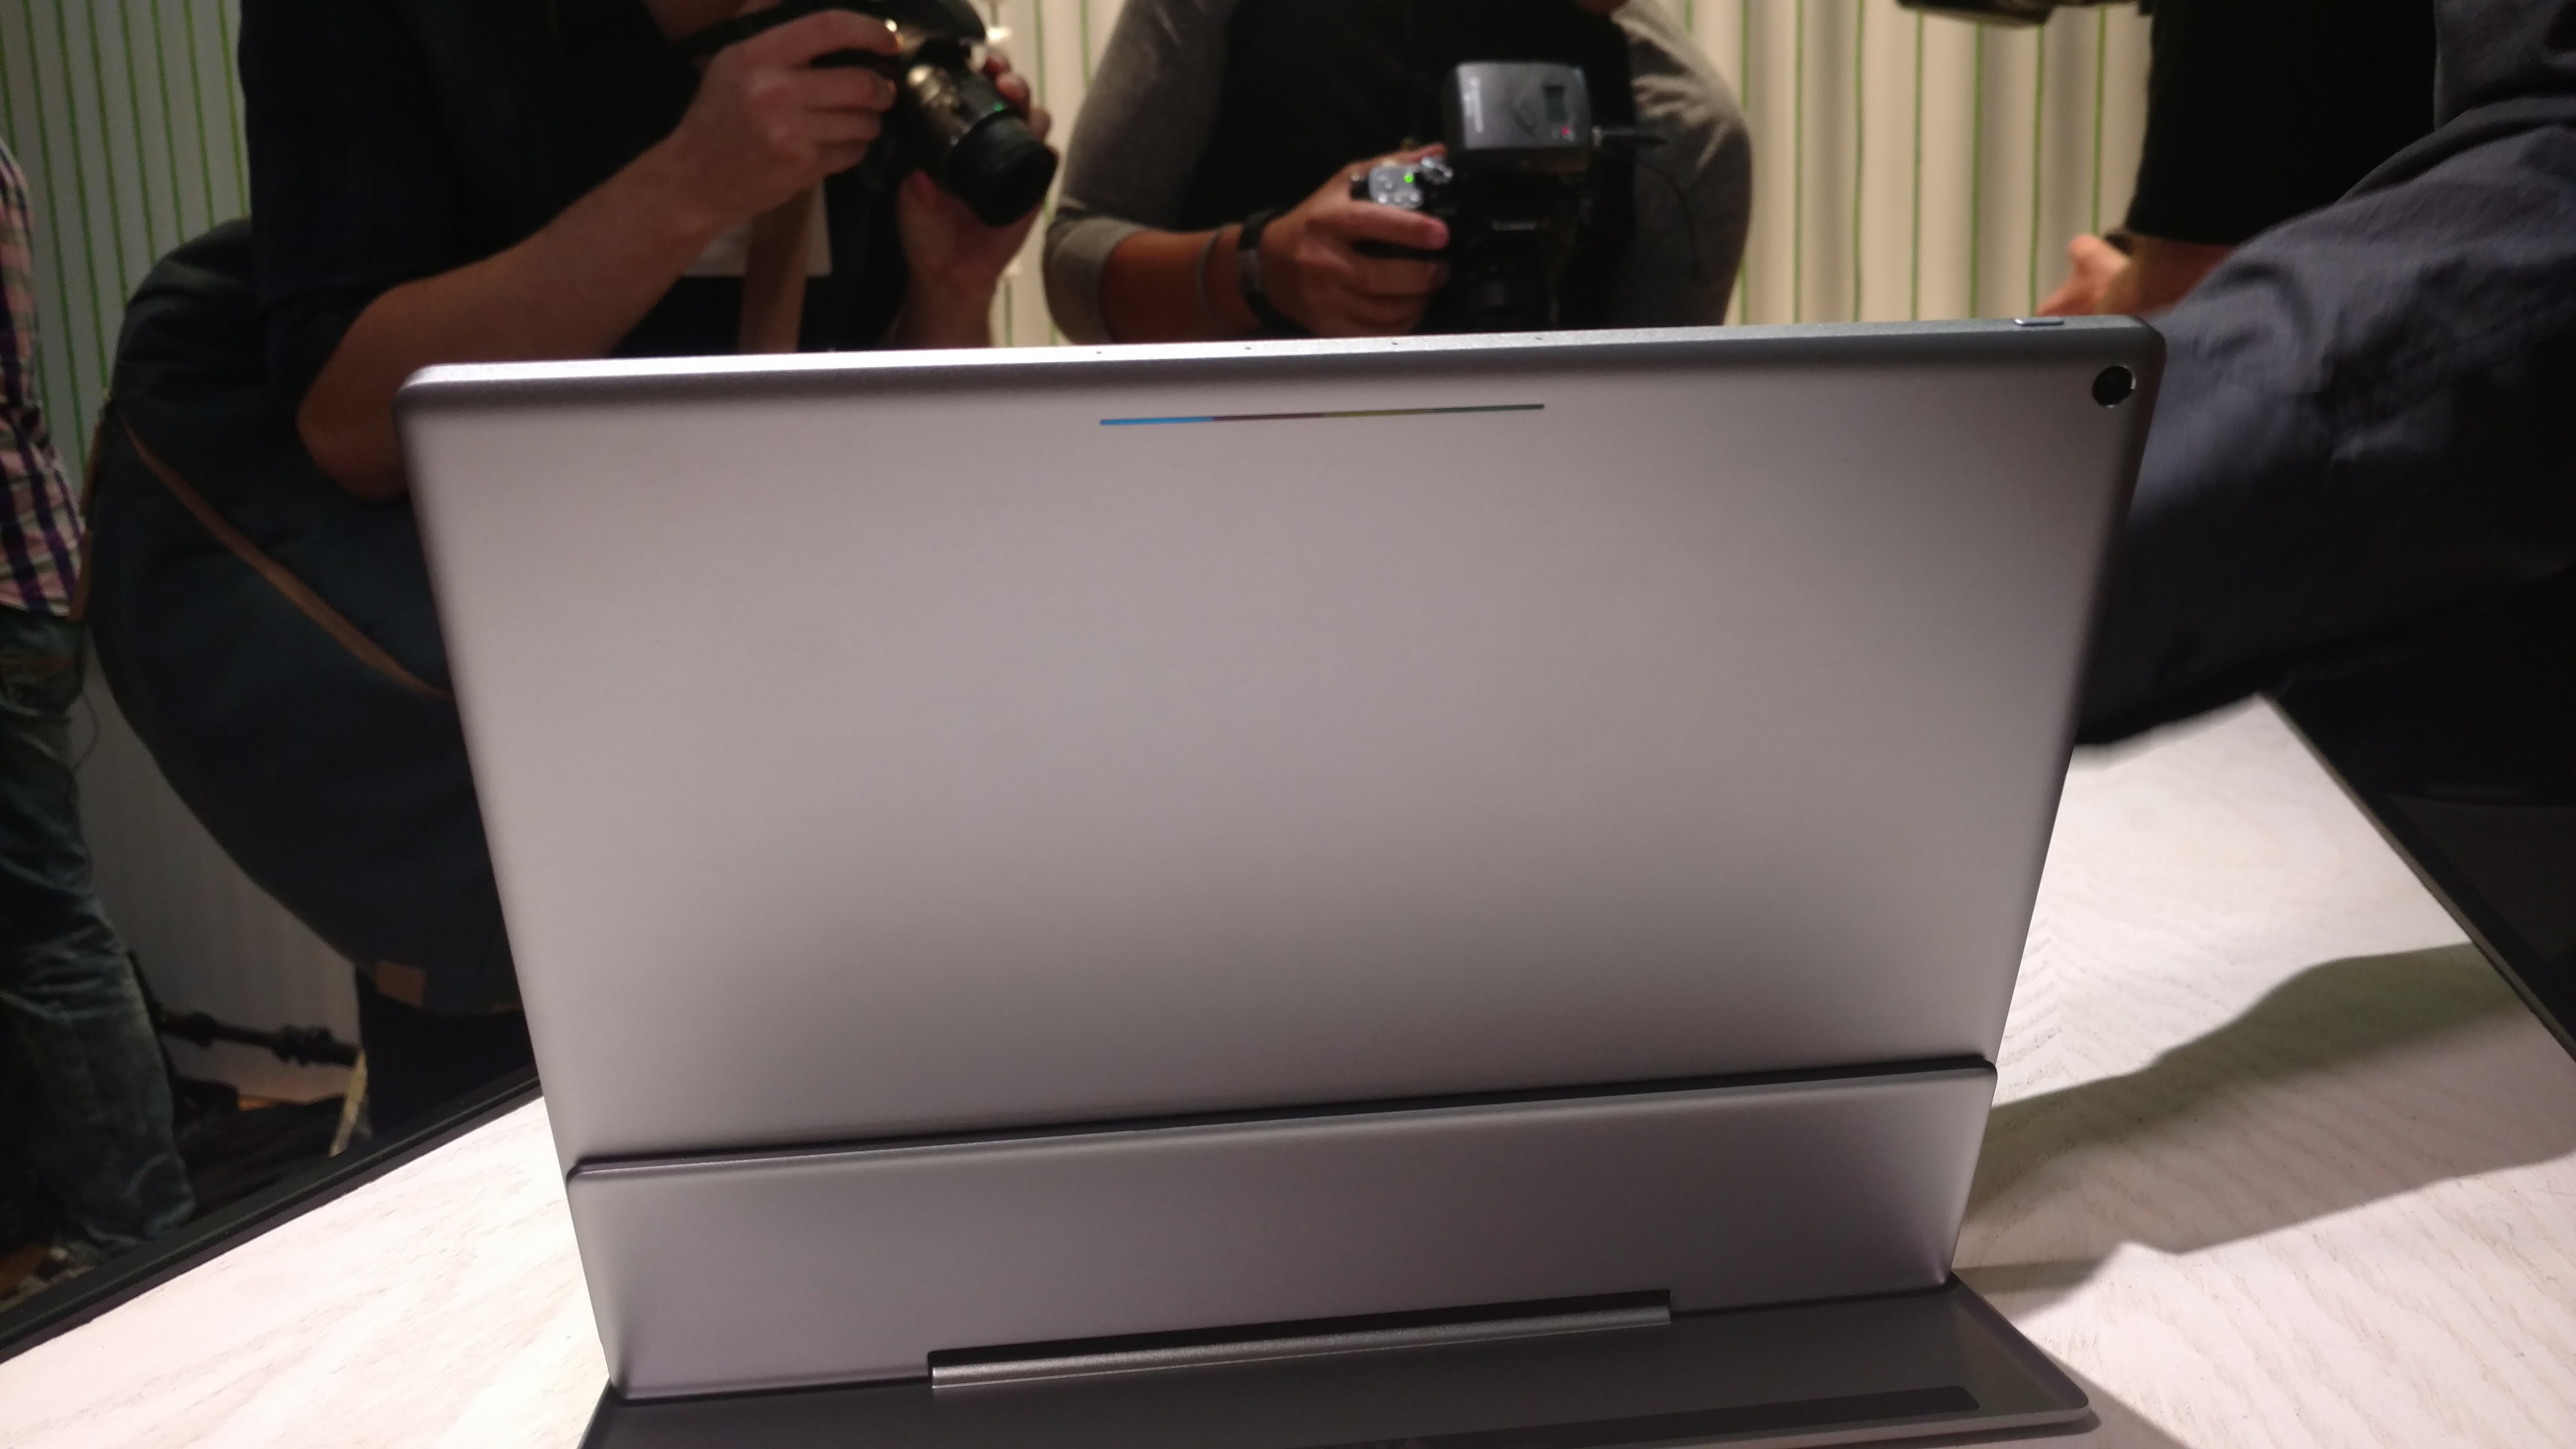 The Google Pixel C from the back.